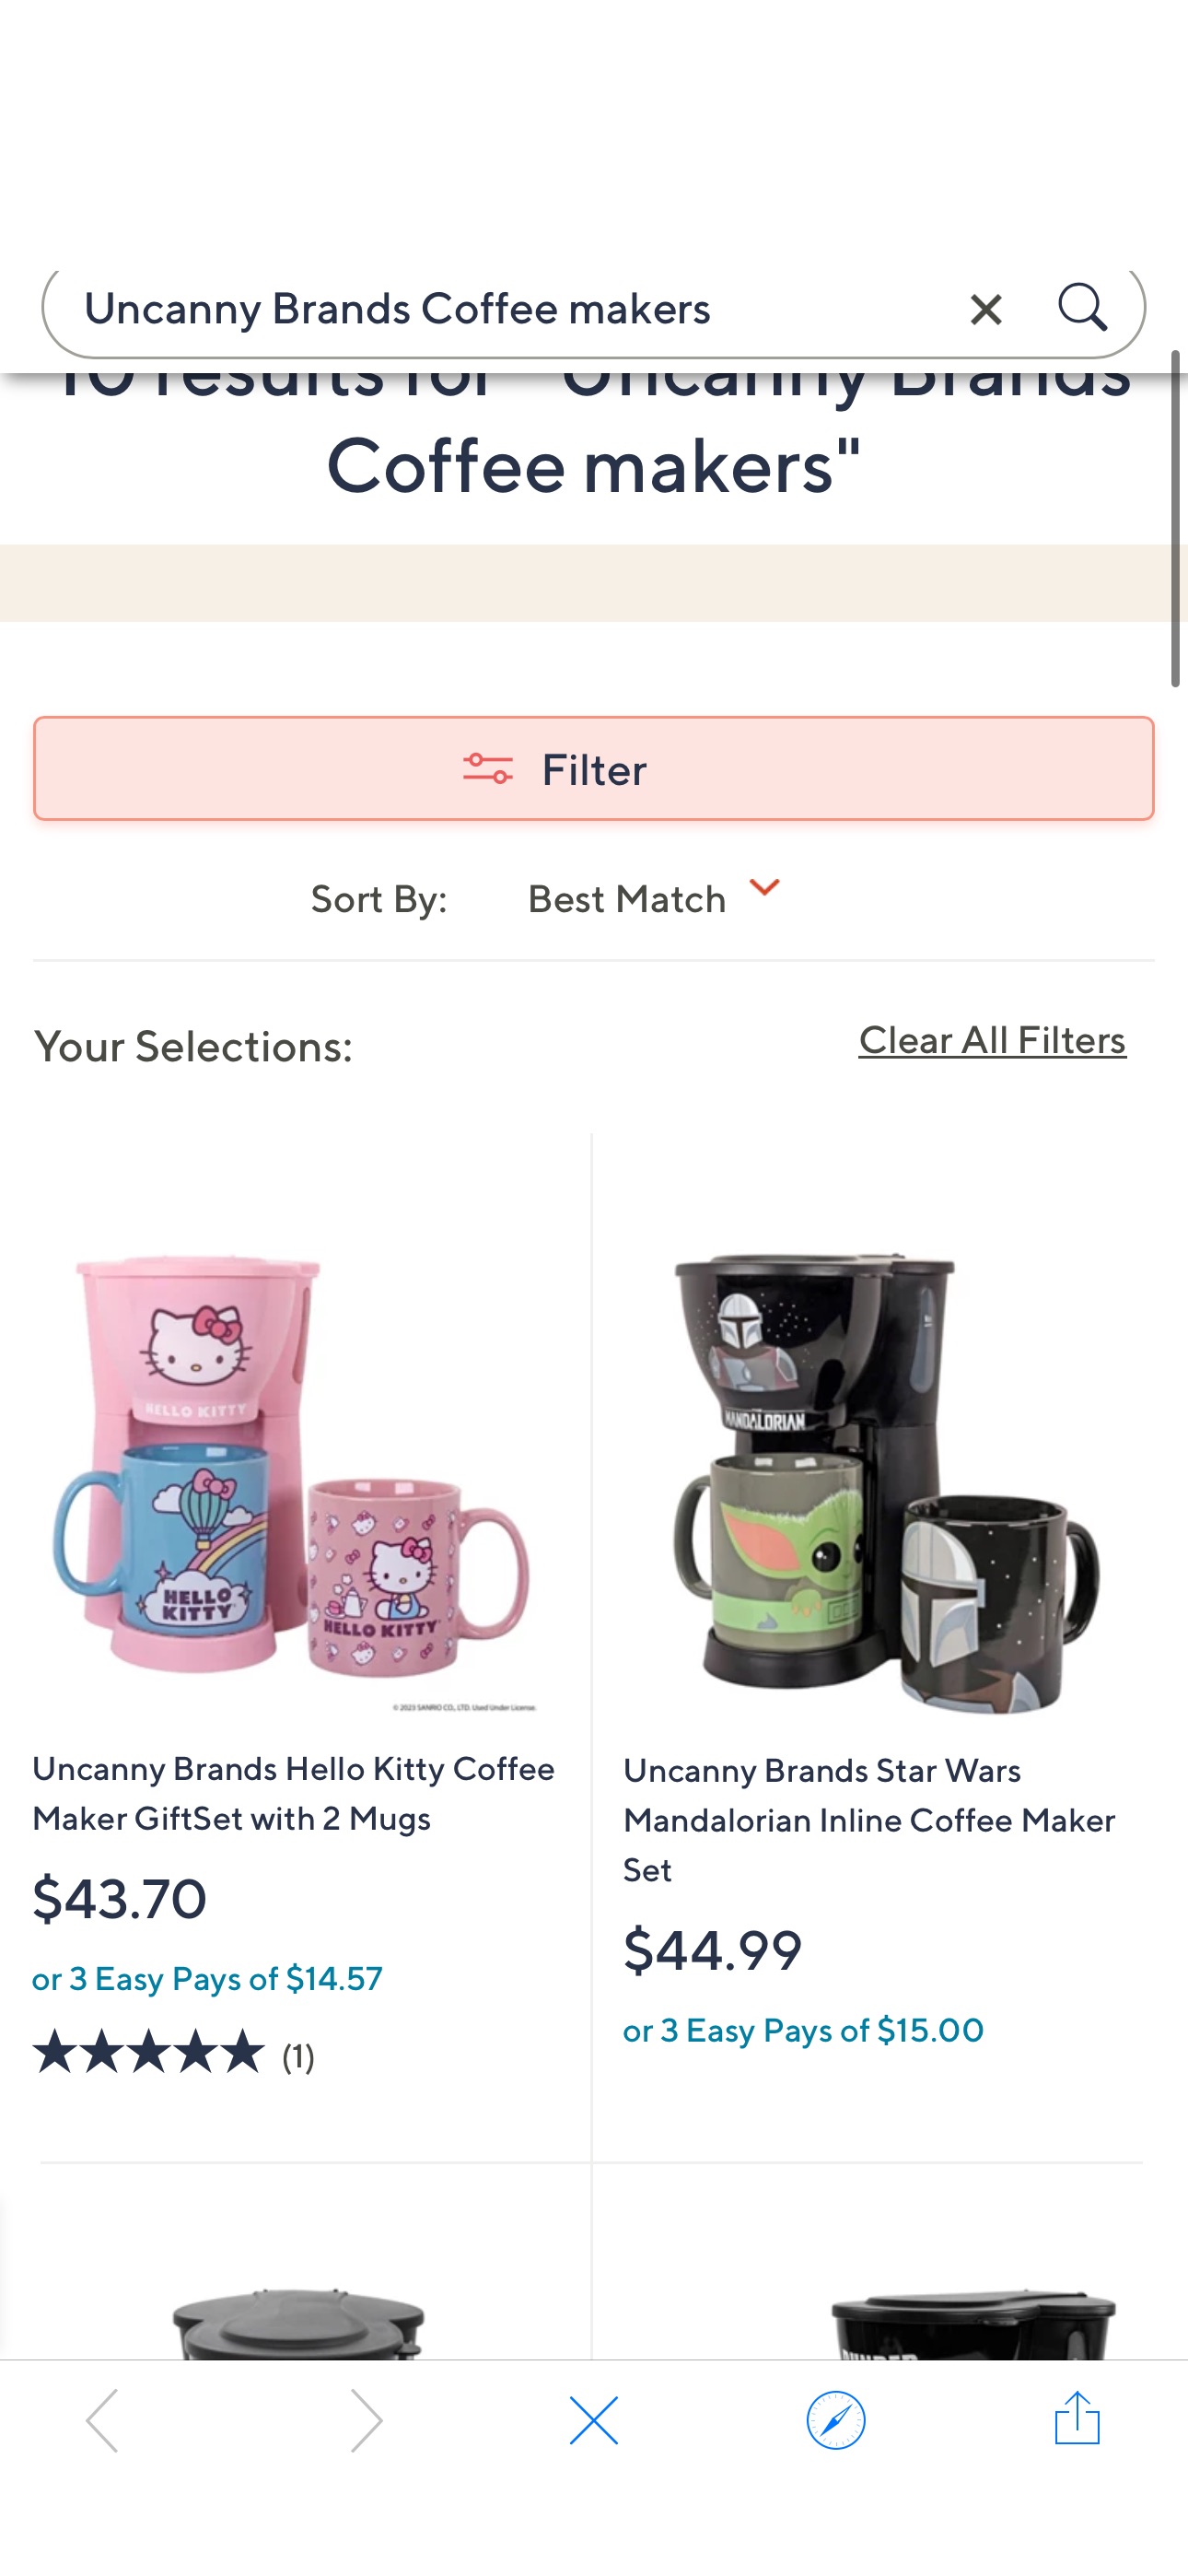 Uncanny Brands Coffee makers Search Results - QVC.com

New Accounts Use Code HELLO20